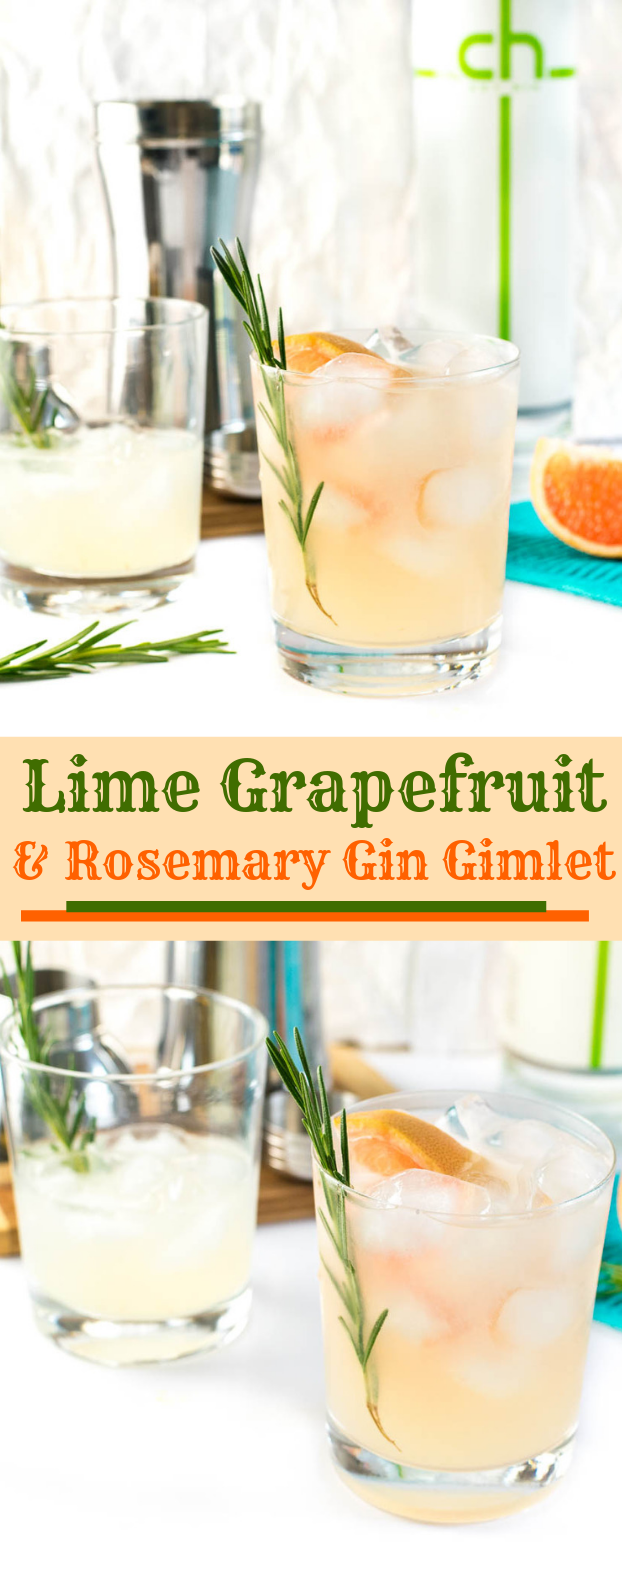 LIME GRAPEFRUIT AND ROSEMARY GIN GIMLET #drink #cocktail